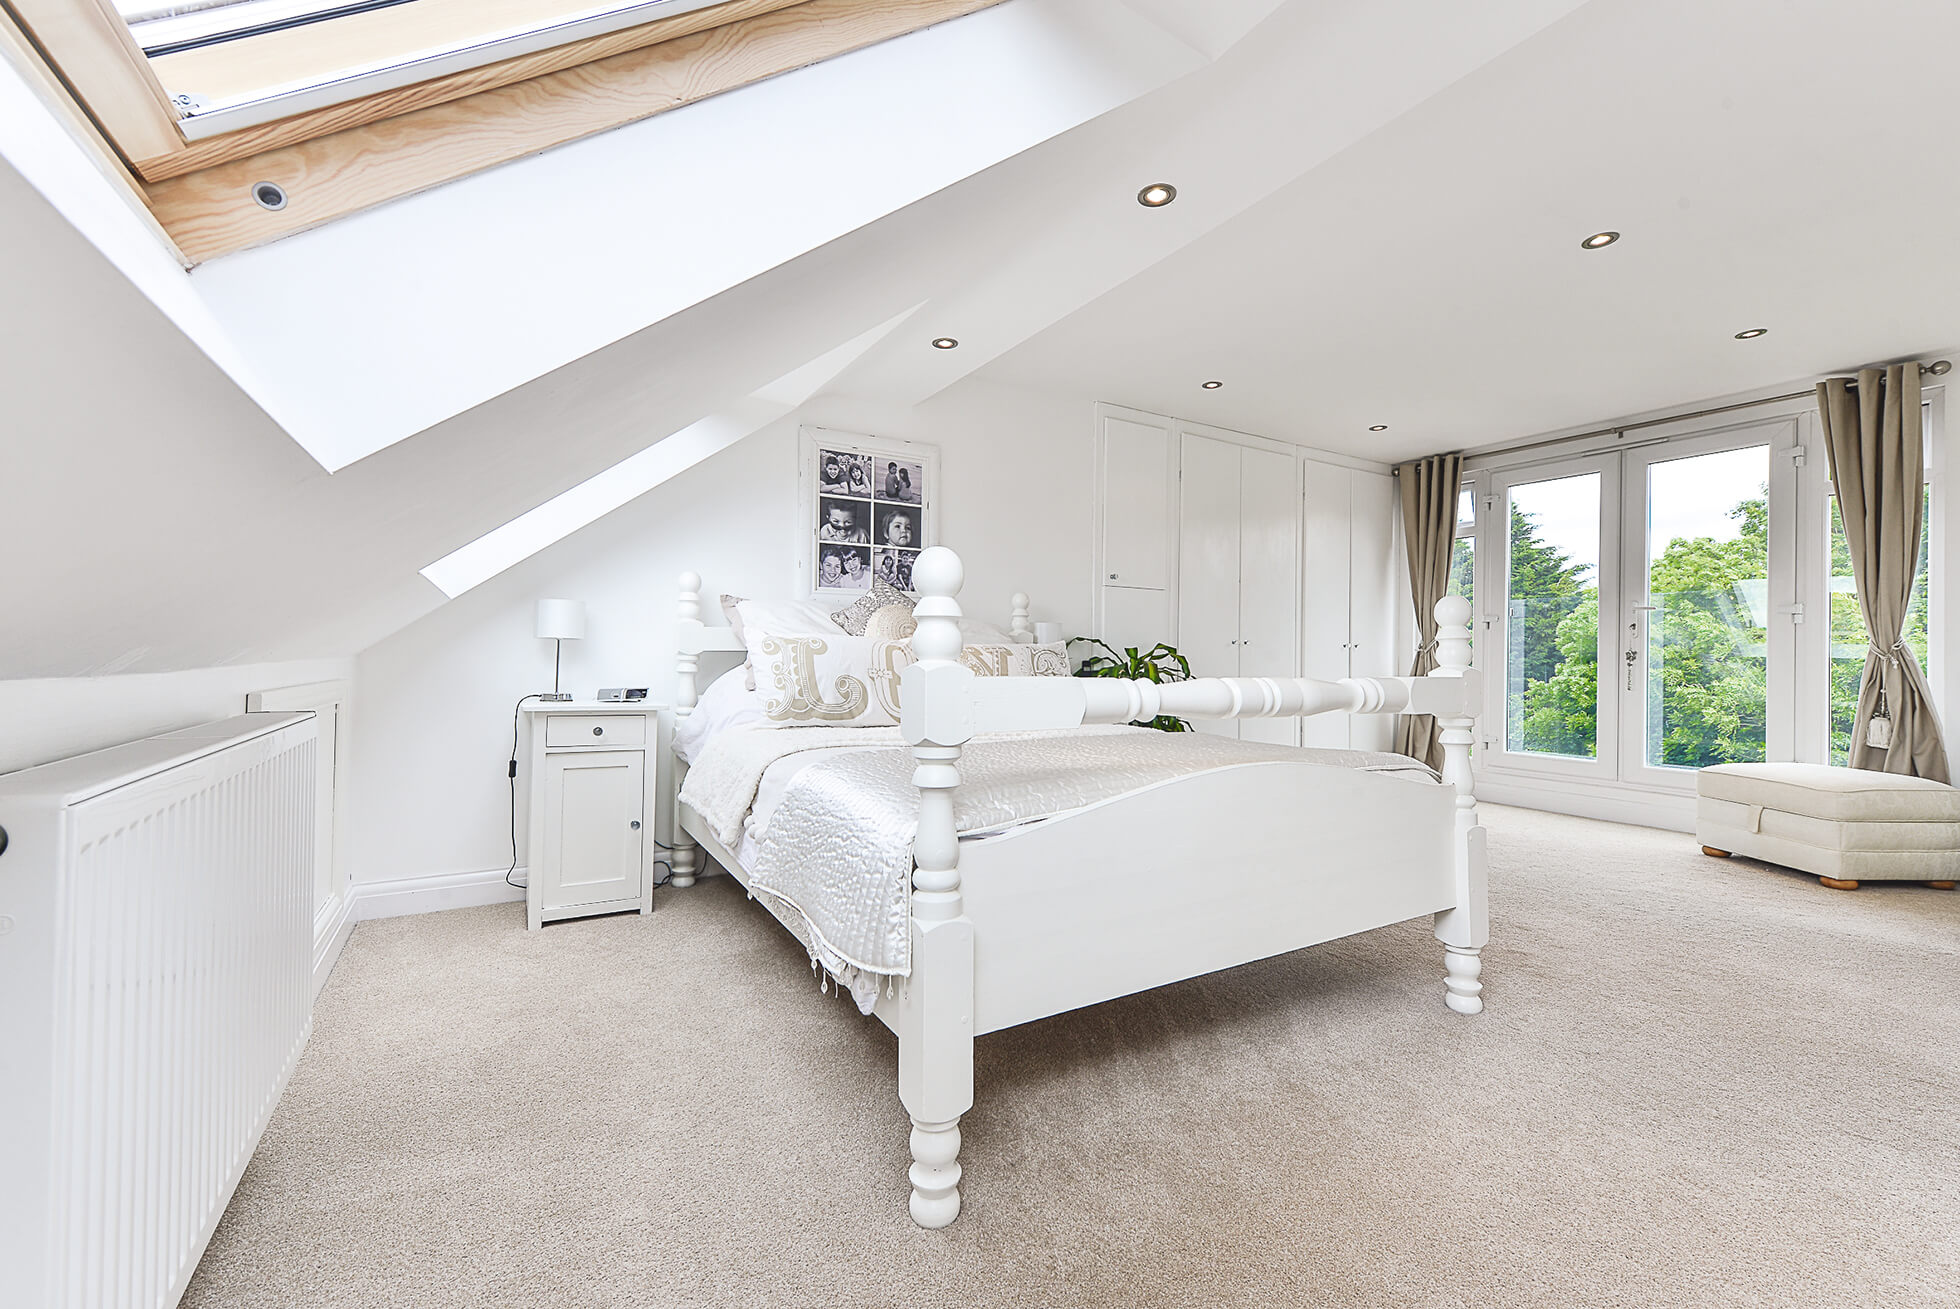 Do you have a question about converting your Loft in Old Hall Green? Here are the most popular questions asked by our clients.